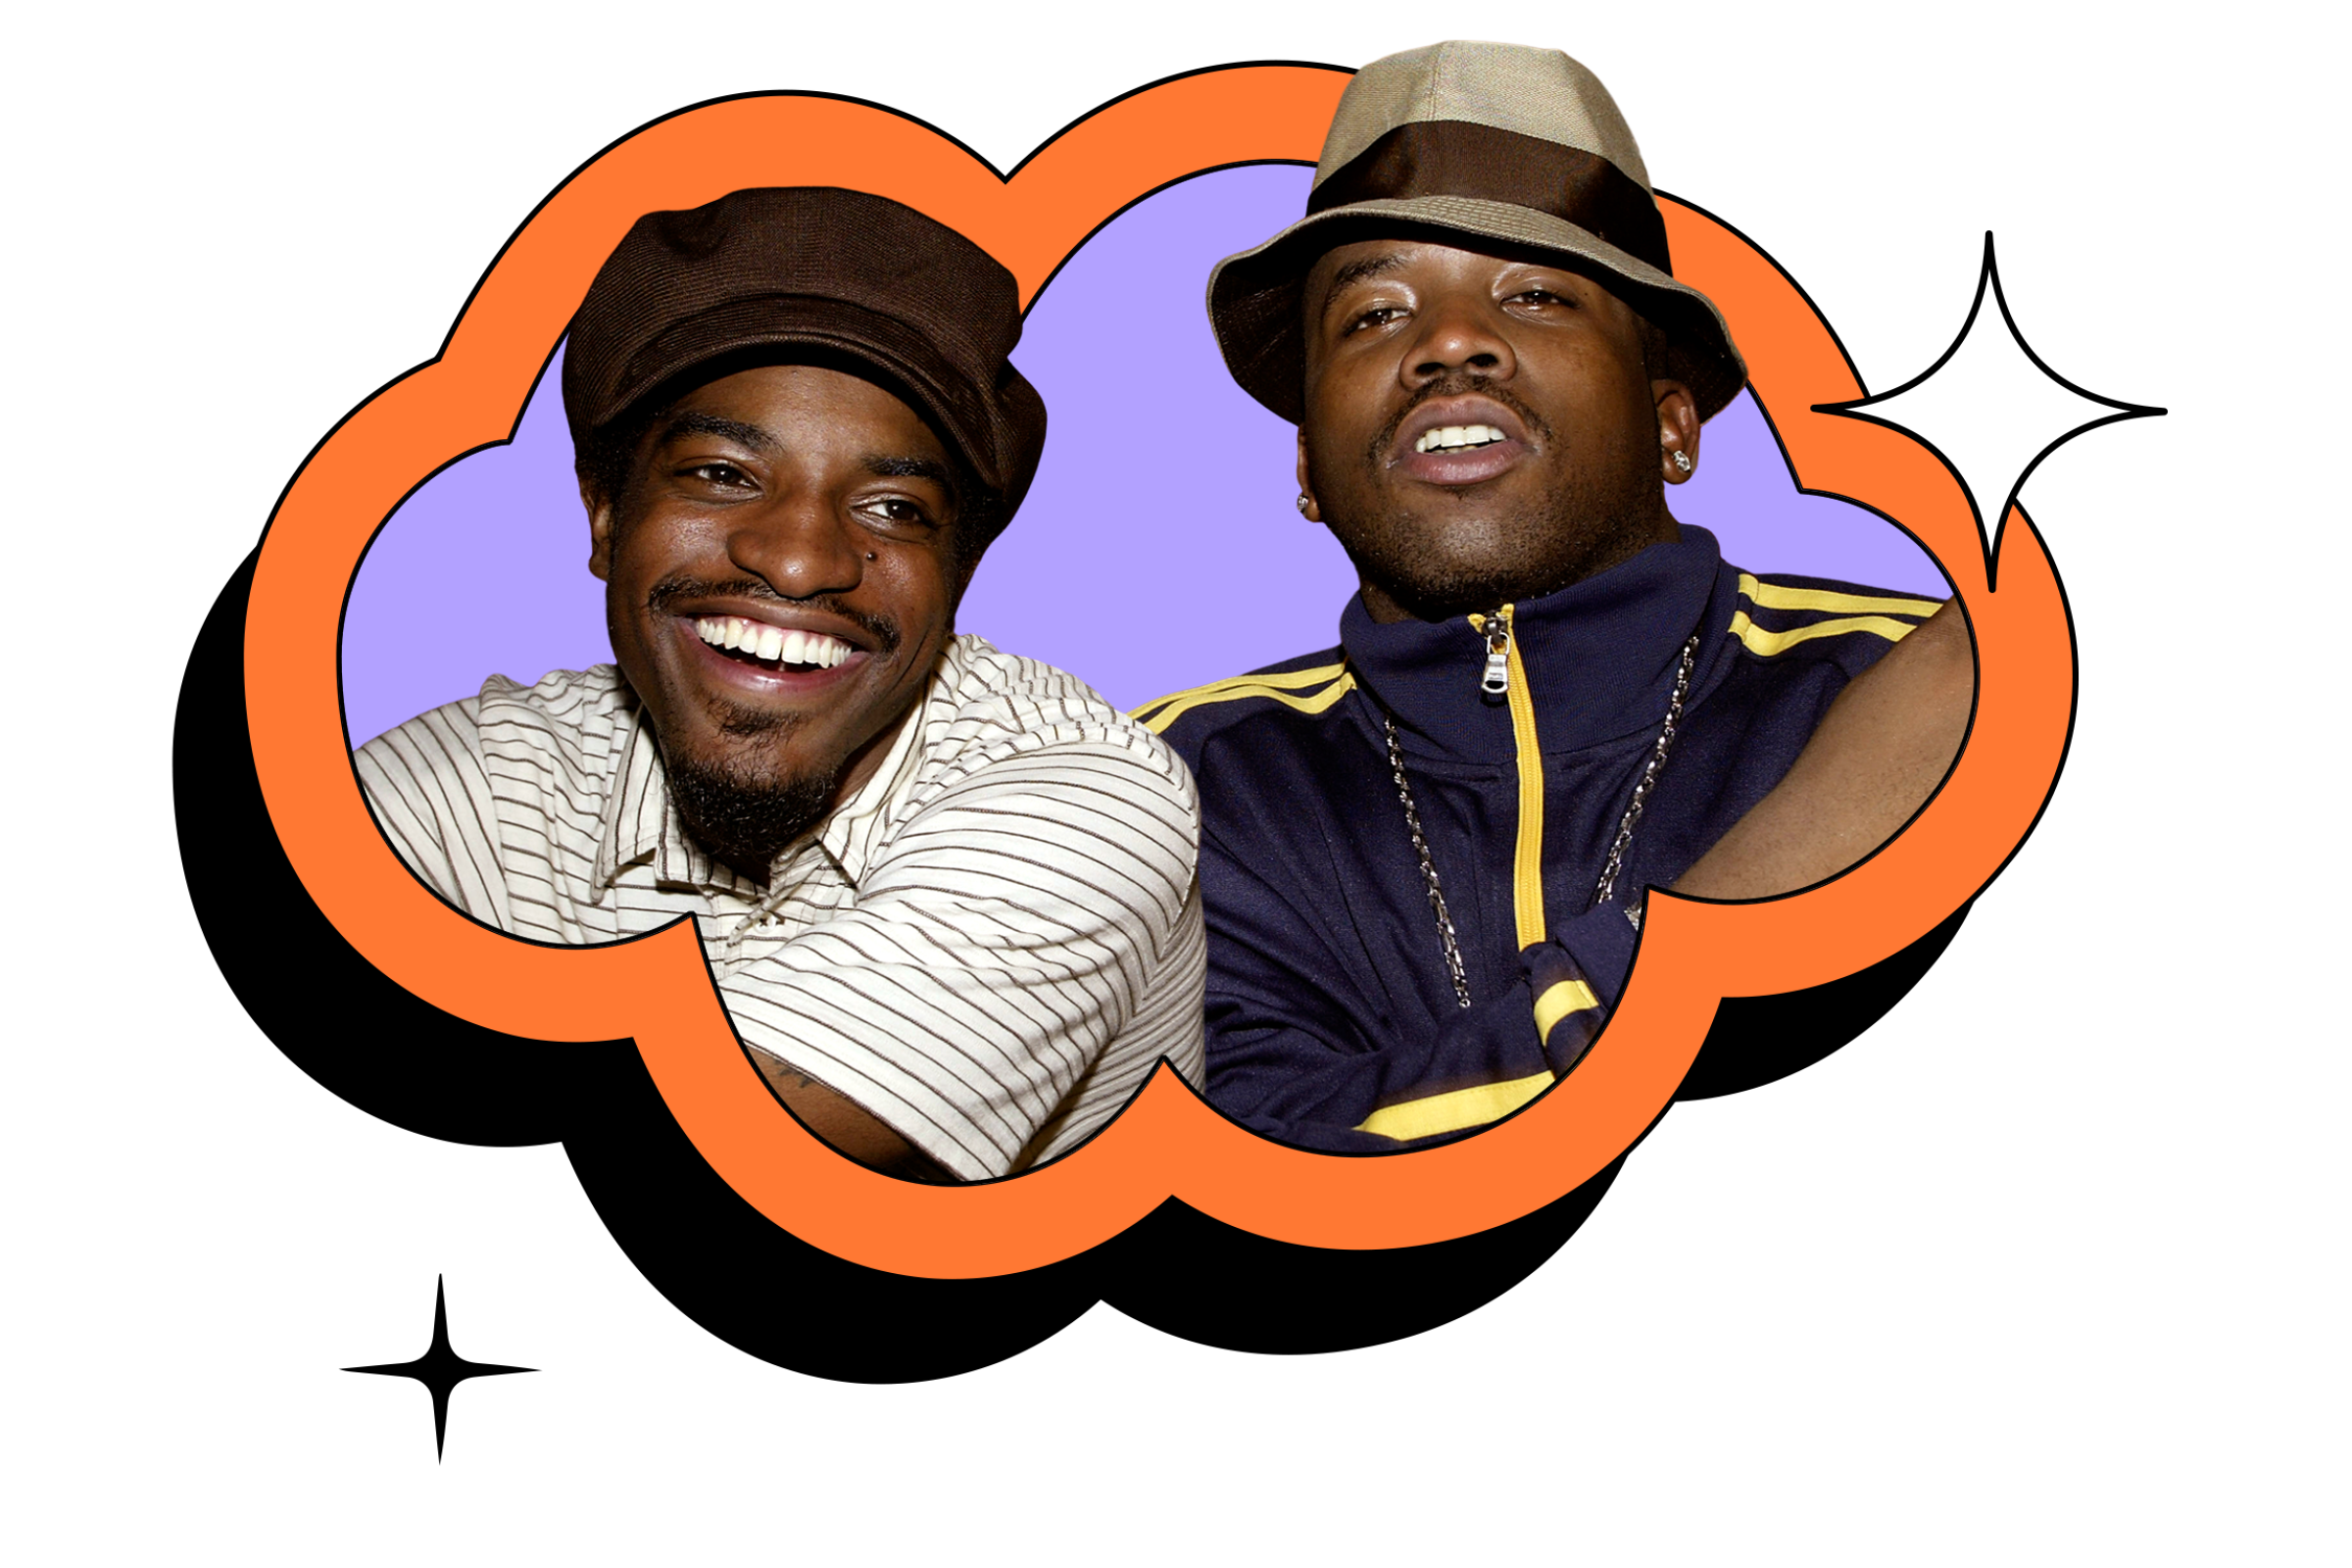 The hip-hop duo Outkast